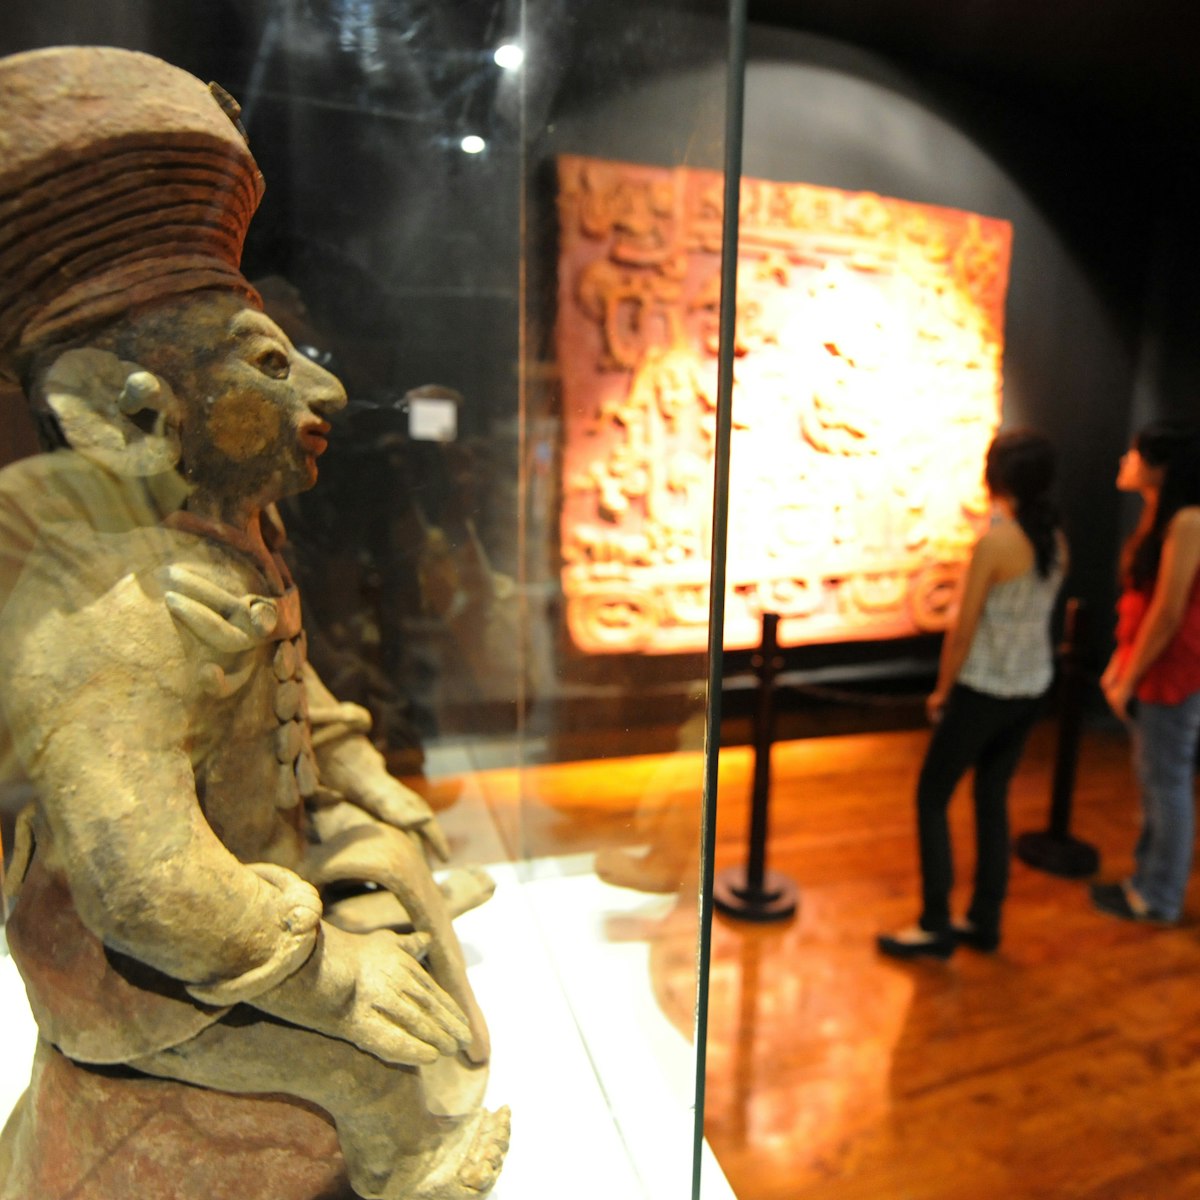 Visitors learn about the Mayas at the Museum of National Identity in Tegucigalpa on December 14, 2012. The beginning of a new Mayan era on December 21 will be marked with celebrations throughout southern Mexico and Central America. Honduras is one of five countries preparing to observe the date, which marks the end of a more than 5,000-year era, according to the Mayan "Long Count" calendar, which began in 3114 BC.  AFP PHOTO/Orlando SIERRA        (Photo credit should read ORLANDO SIERRA/AFP/Getty Images)